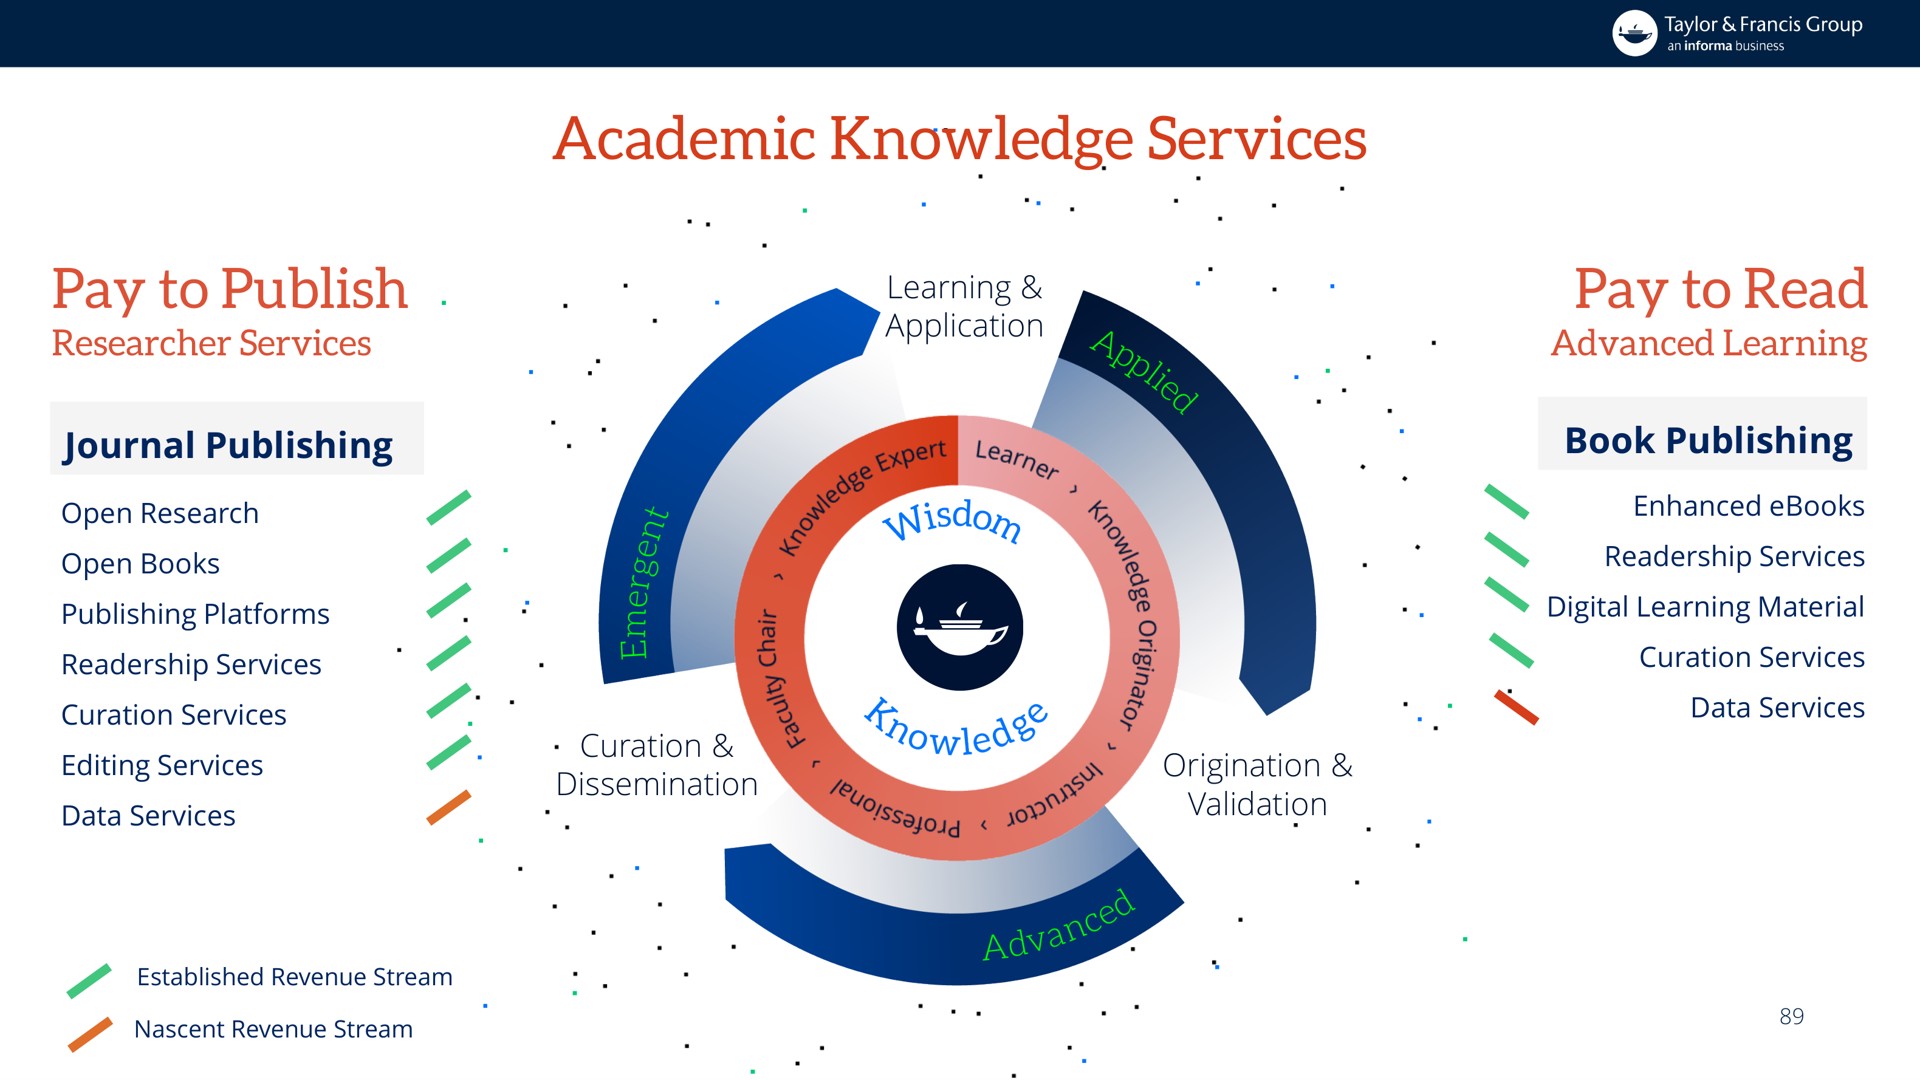 academic knowledge services pay to publish pay to read a | Informa